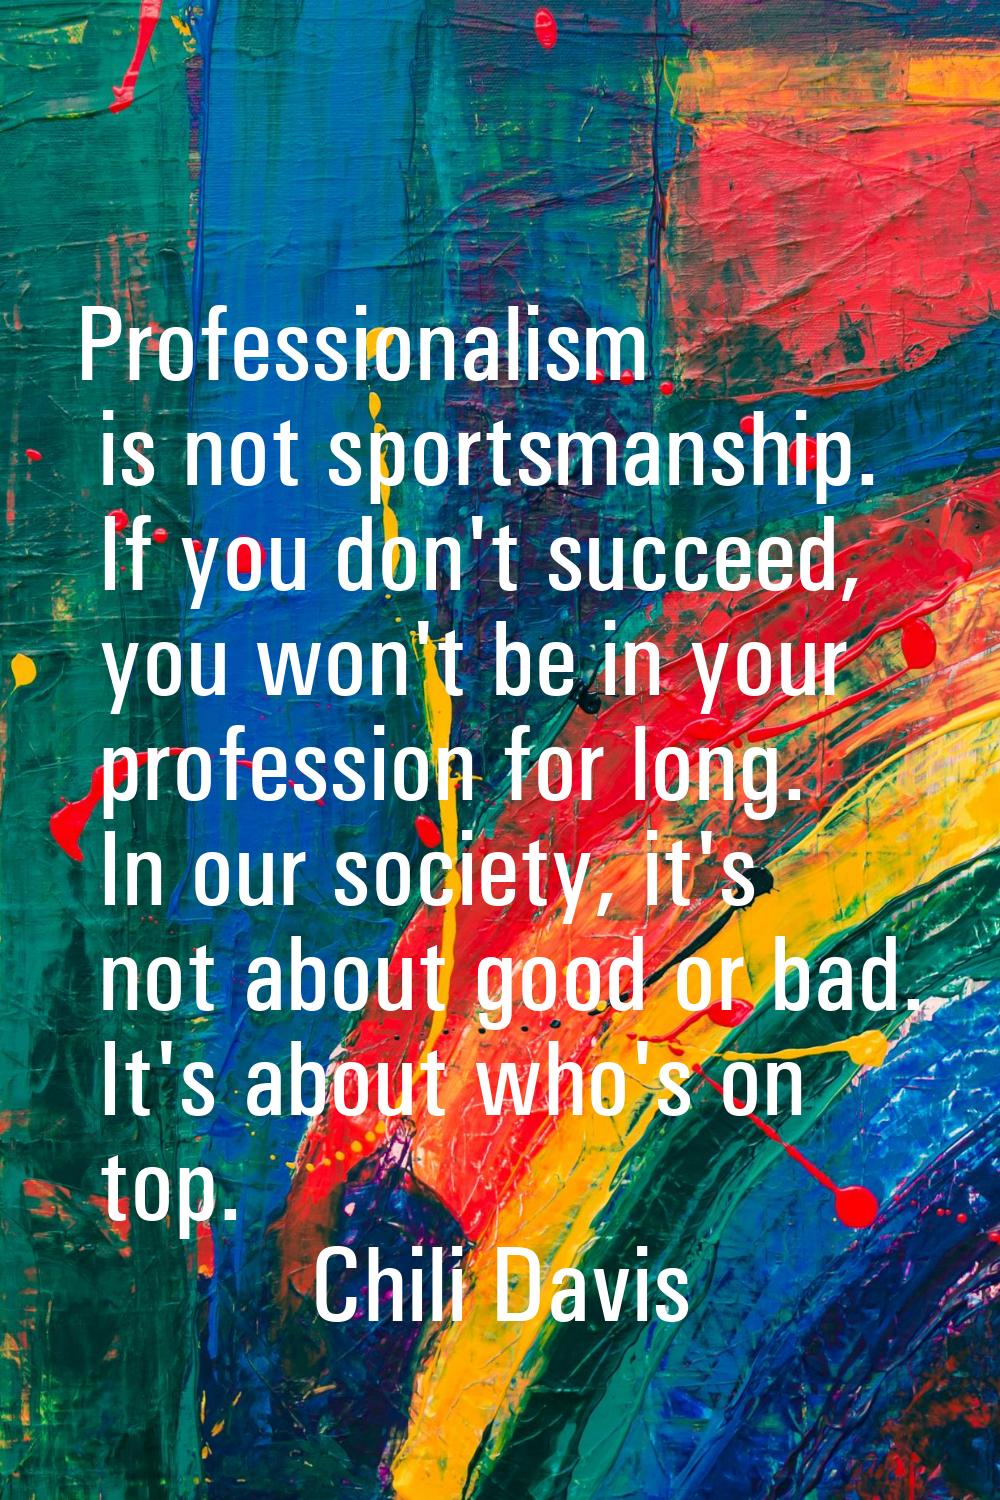 Professionalism is not sportsmanship. If you don't succeed, you won't be in your profession for lon